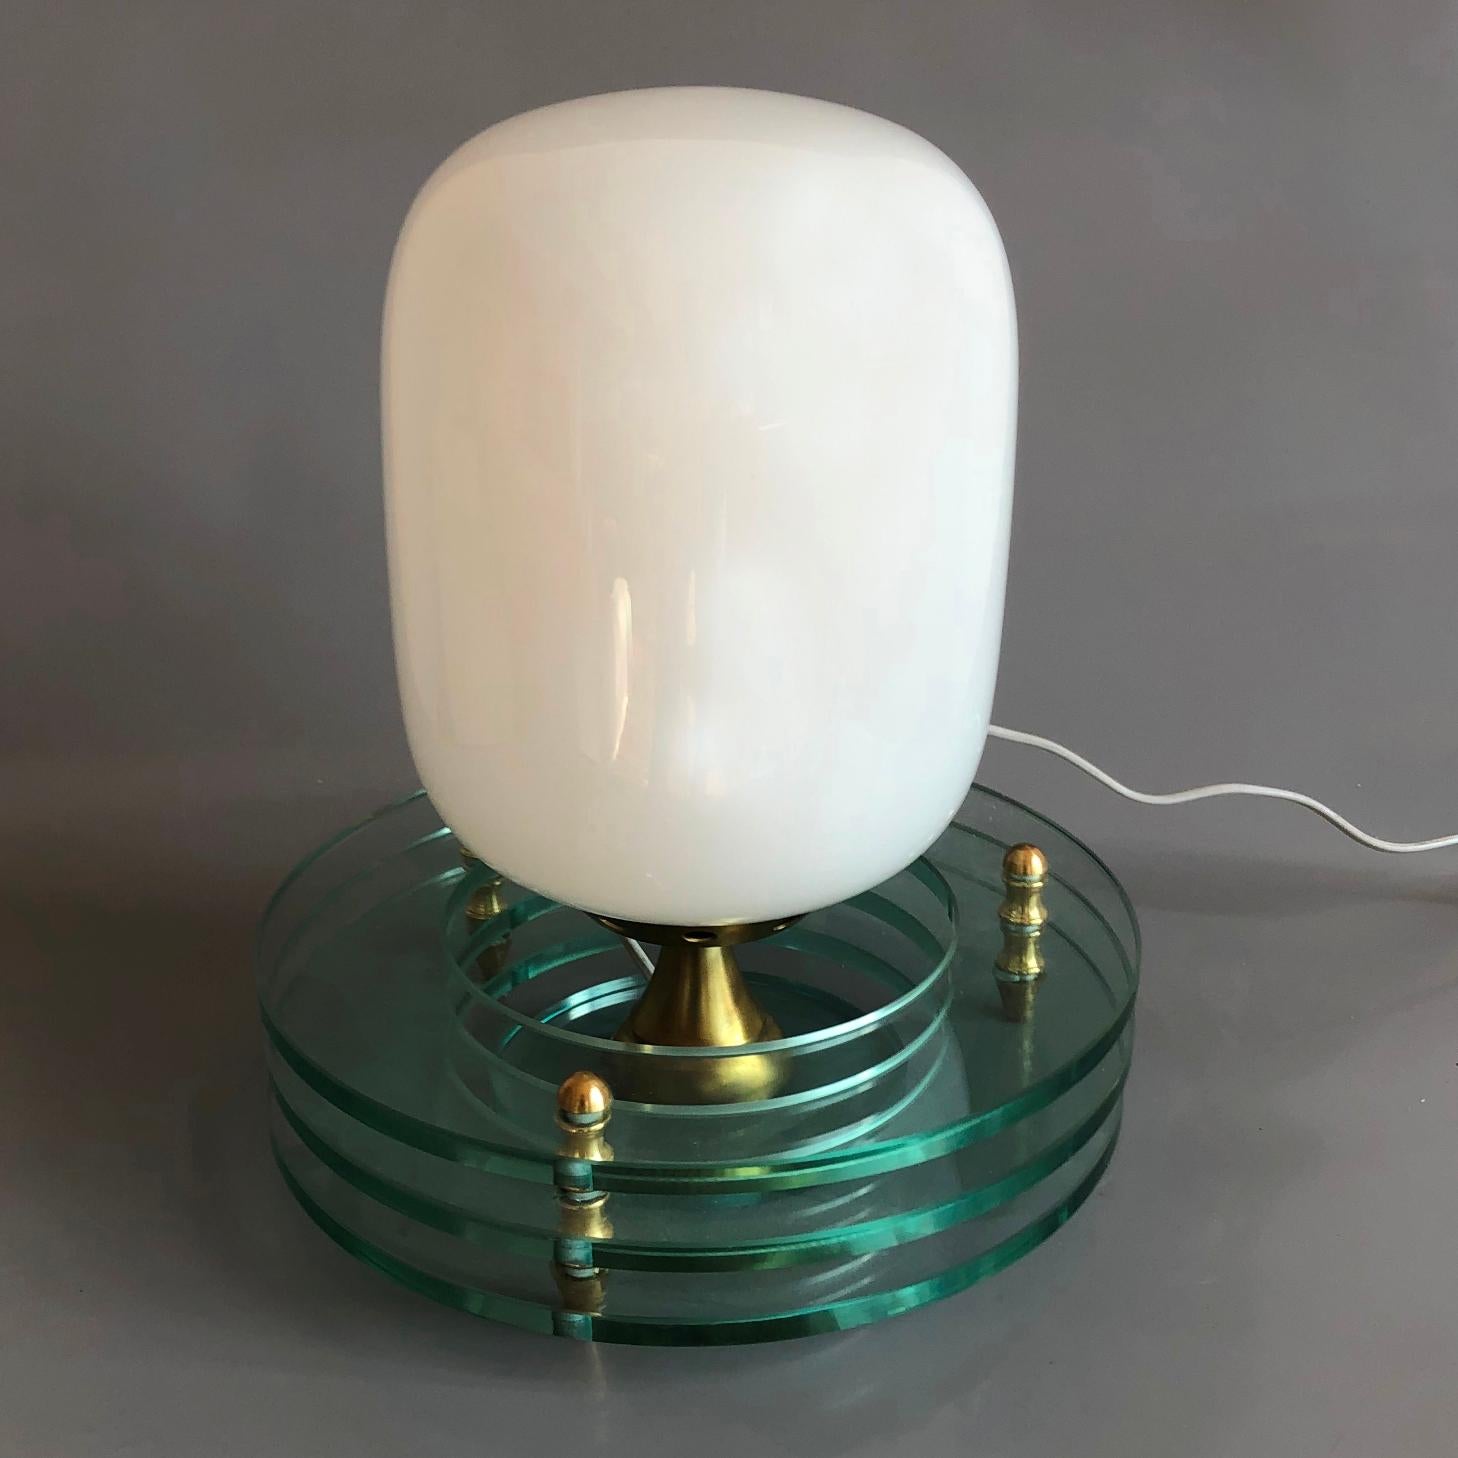 Table lamp consisting of two parts. Cocoon shaped opaline glass shade and triple ringed green base with brass fitting elements.
Original condition. All original pieces.